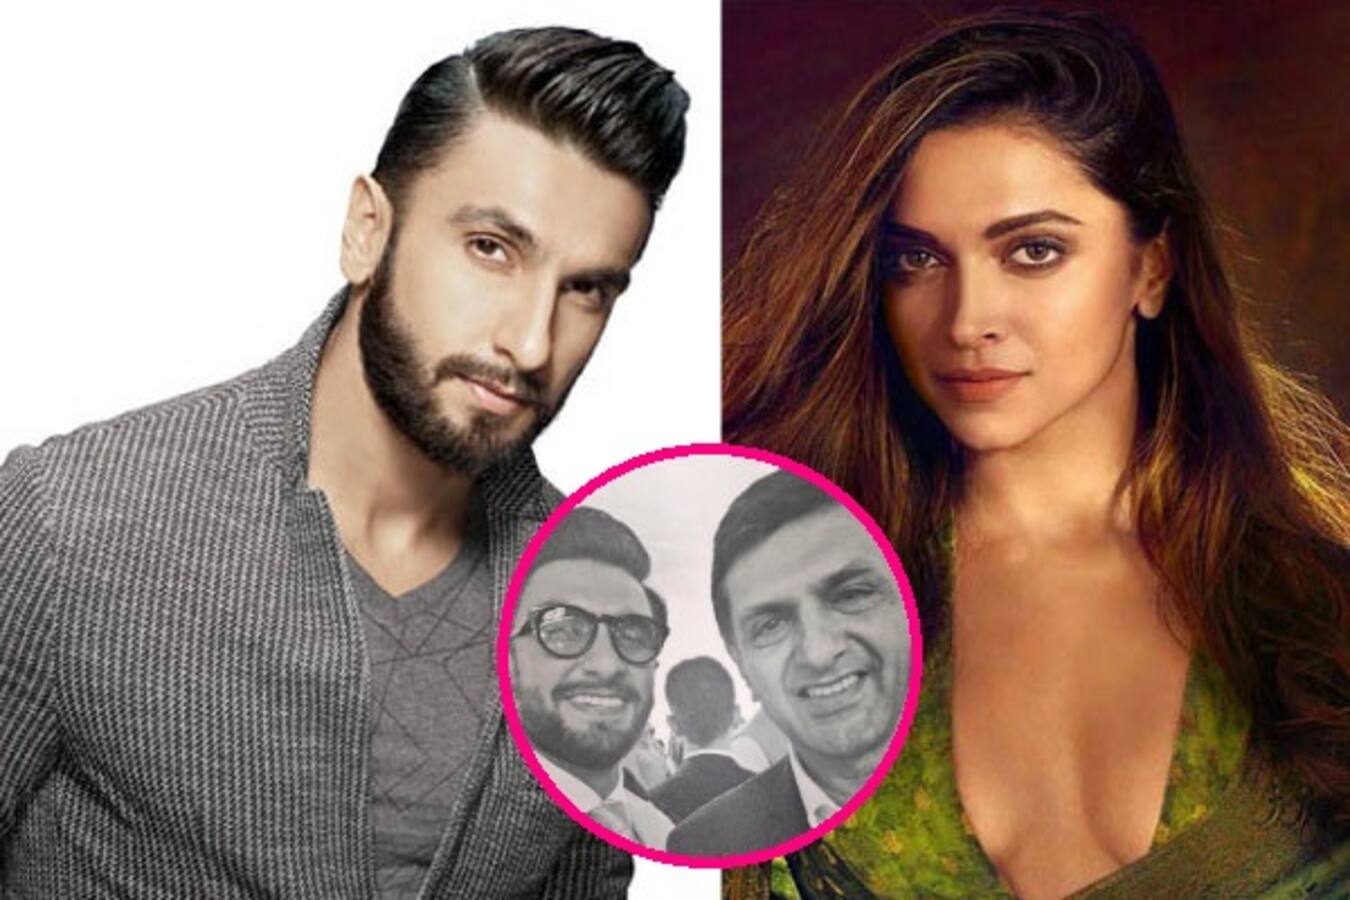 Bonding time! Ranveer Singh spends a day with girlfriend Deepika Padukone's father - view pics